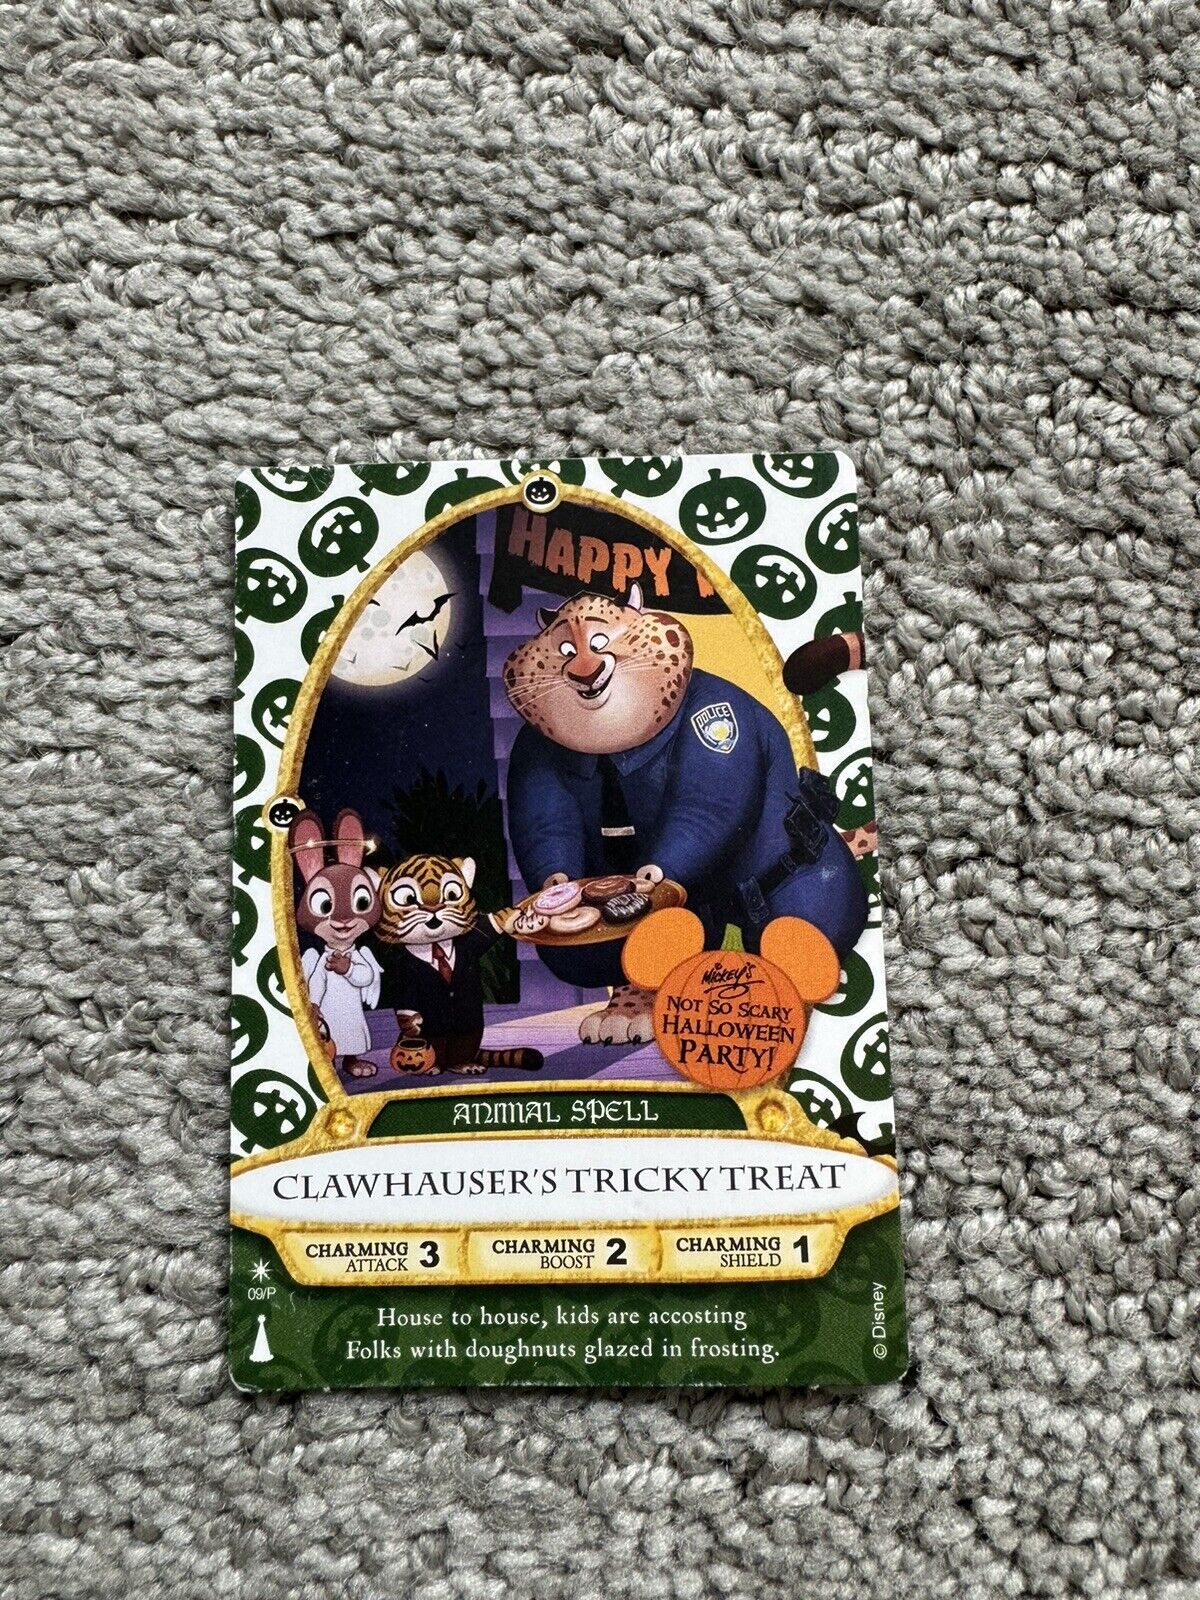 YAY RARE Disney Sorcerers of the Magic Kingdom Clawhauser’s Party Card #09P